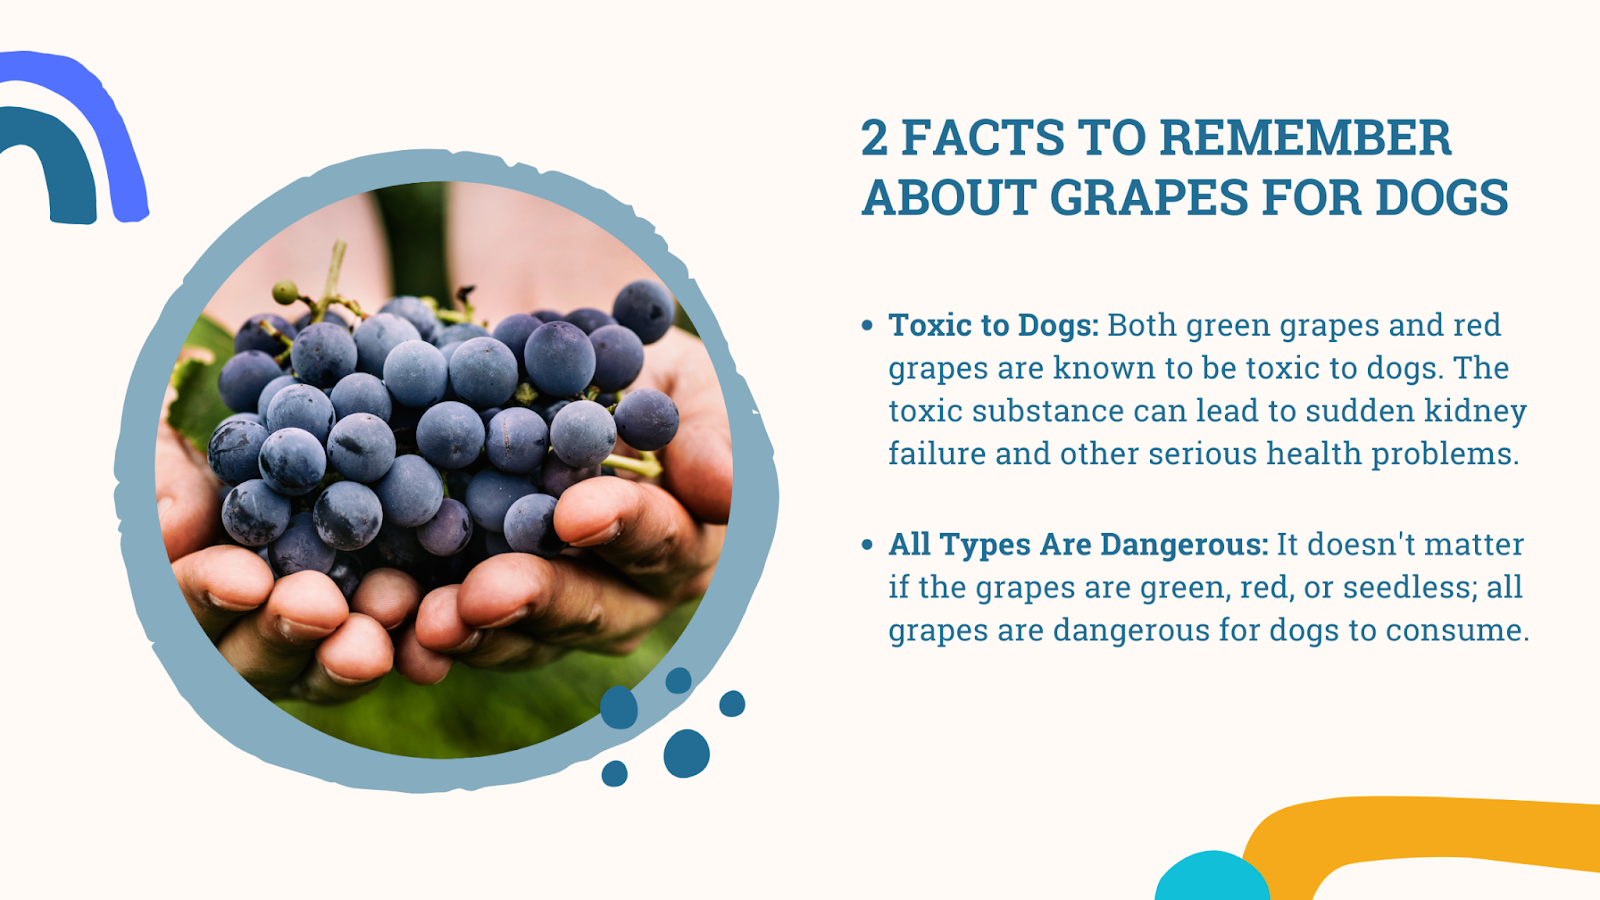 Grapes for dogs